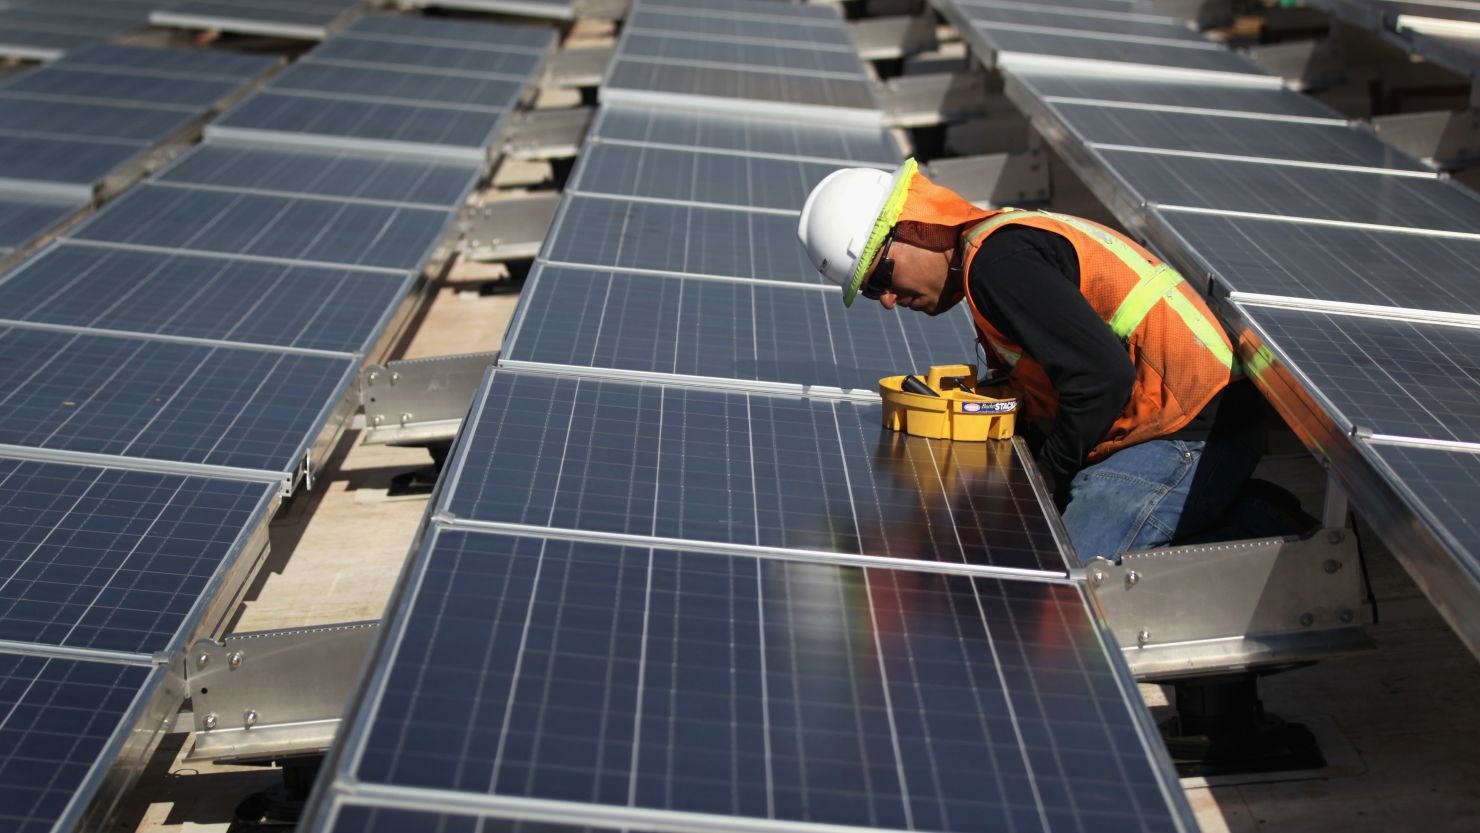  A worker finishes installing solar panels on top of a building.